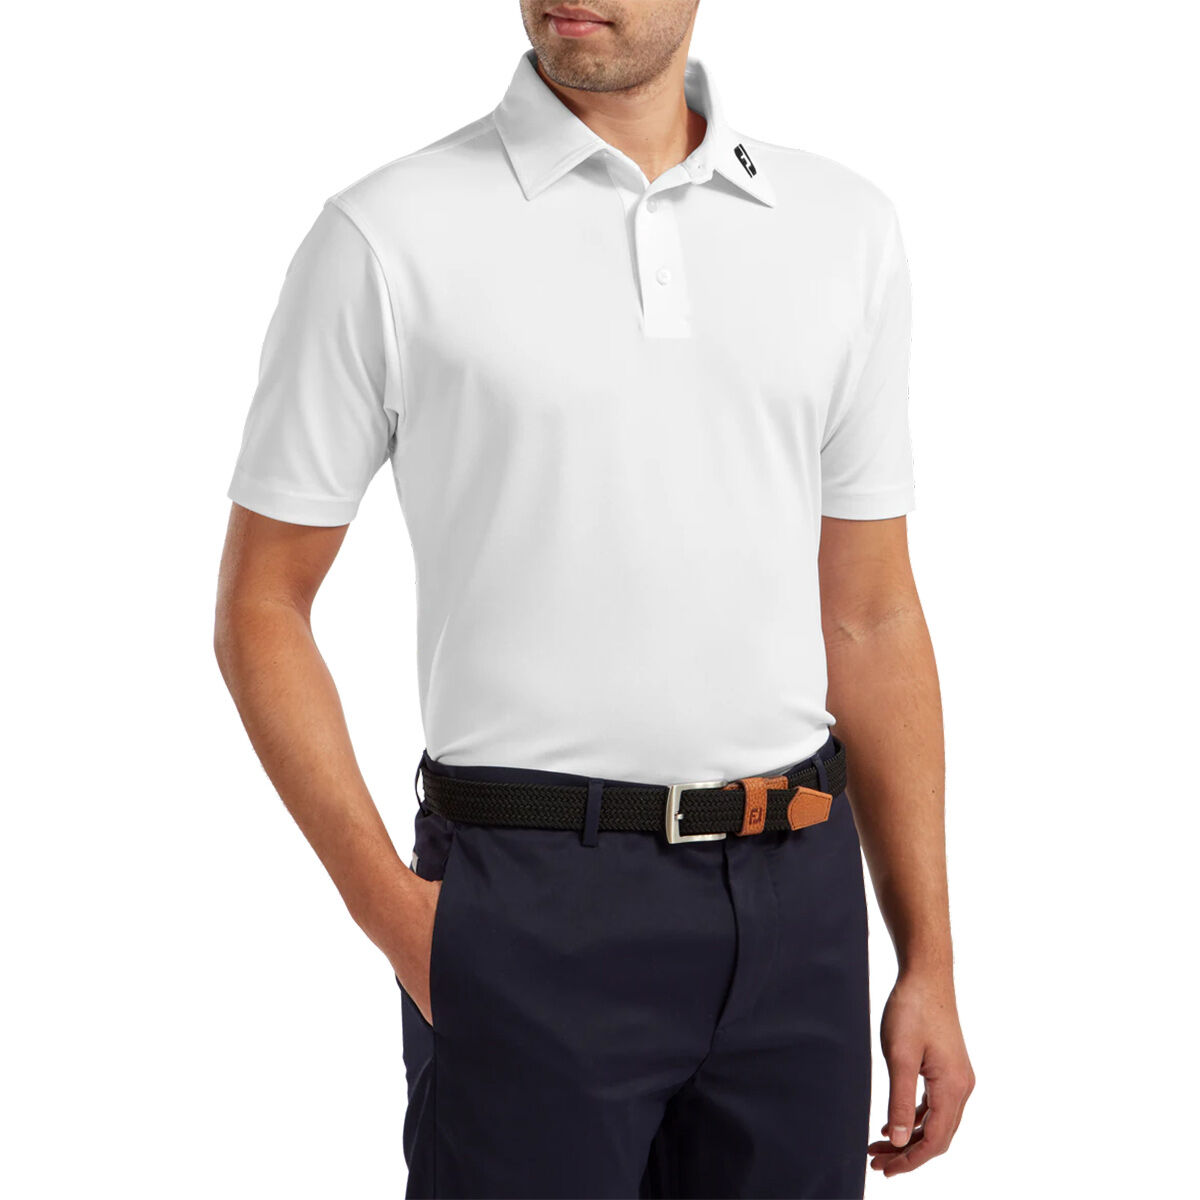 FootJoy Men’s Stretch Pique Solid Colour Golf Polo Shirt, Mens, White, Large | American Golf